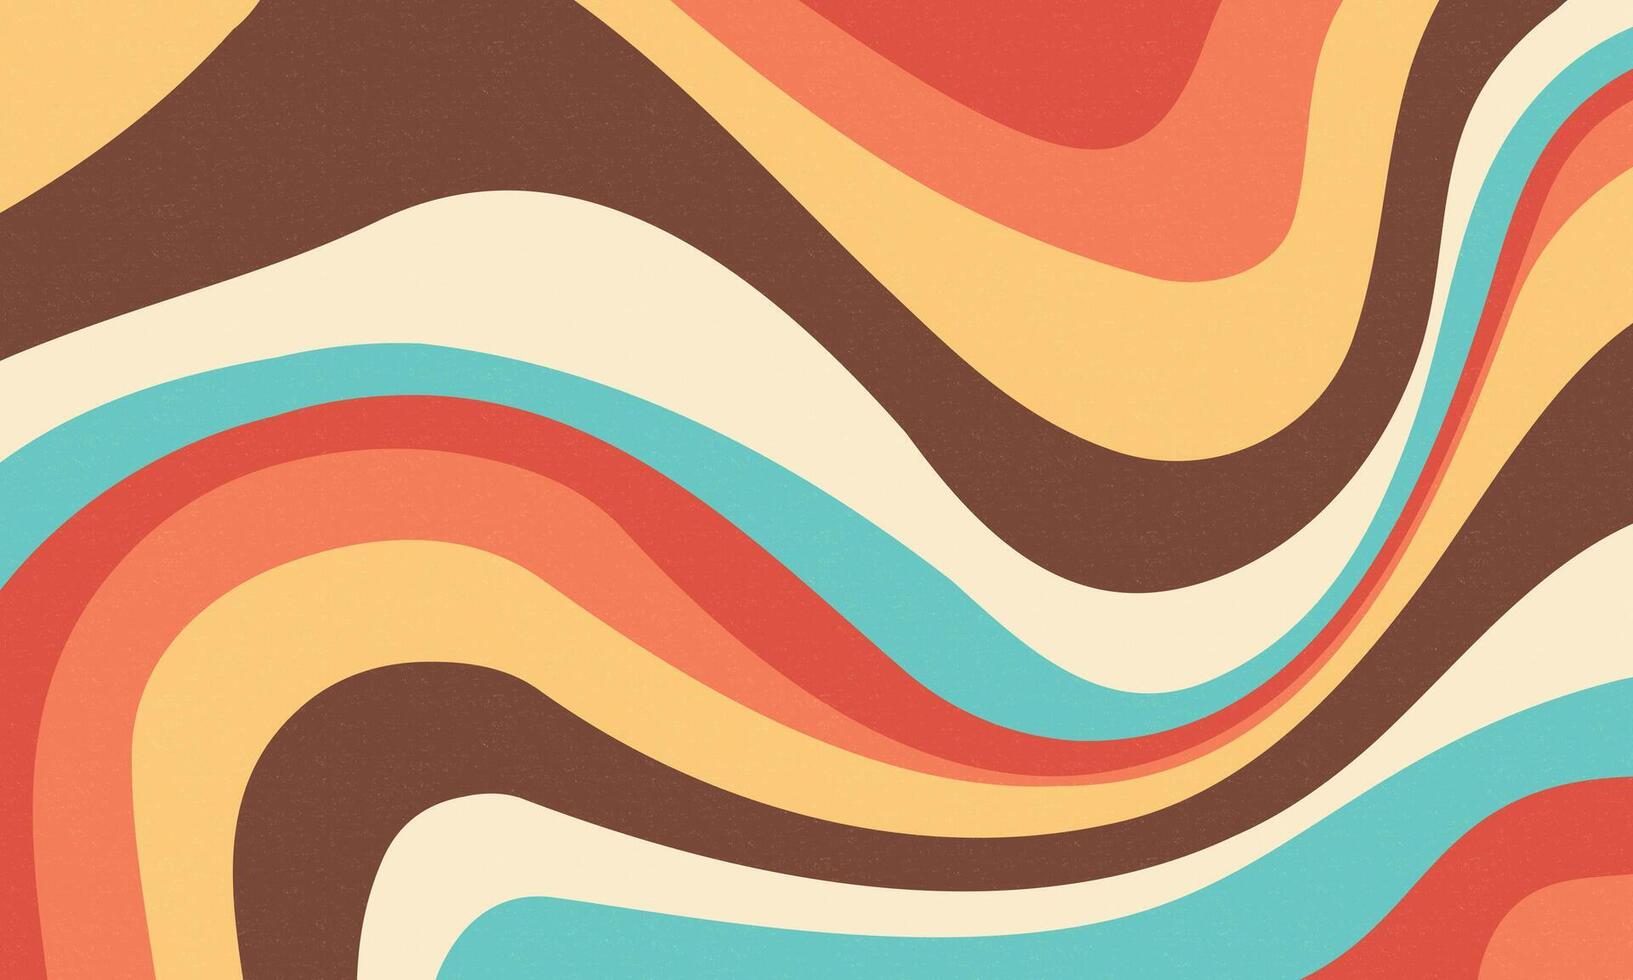 Psychedelic retro groovy colorful wavy background vector